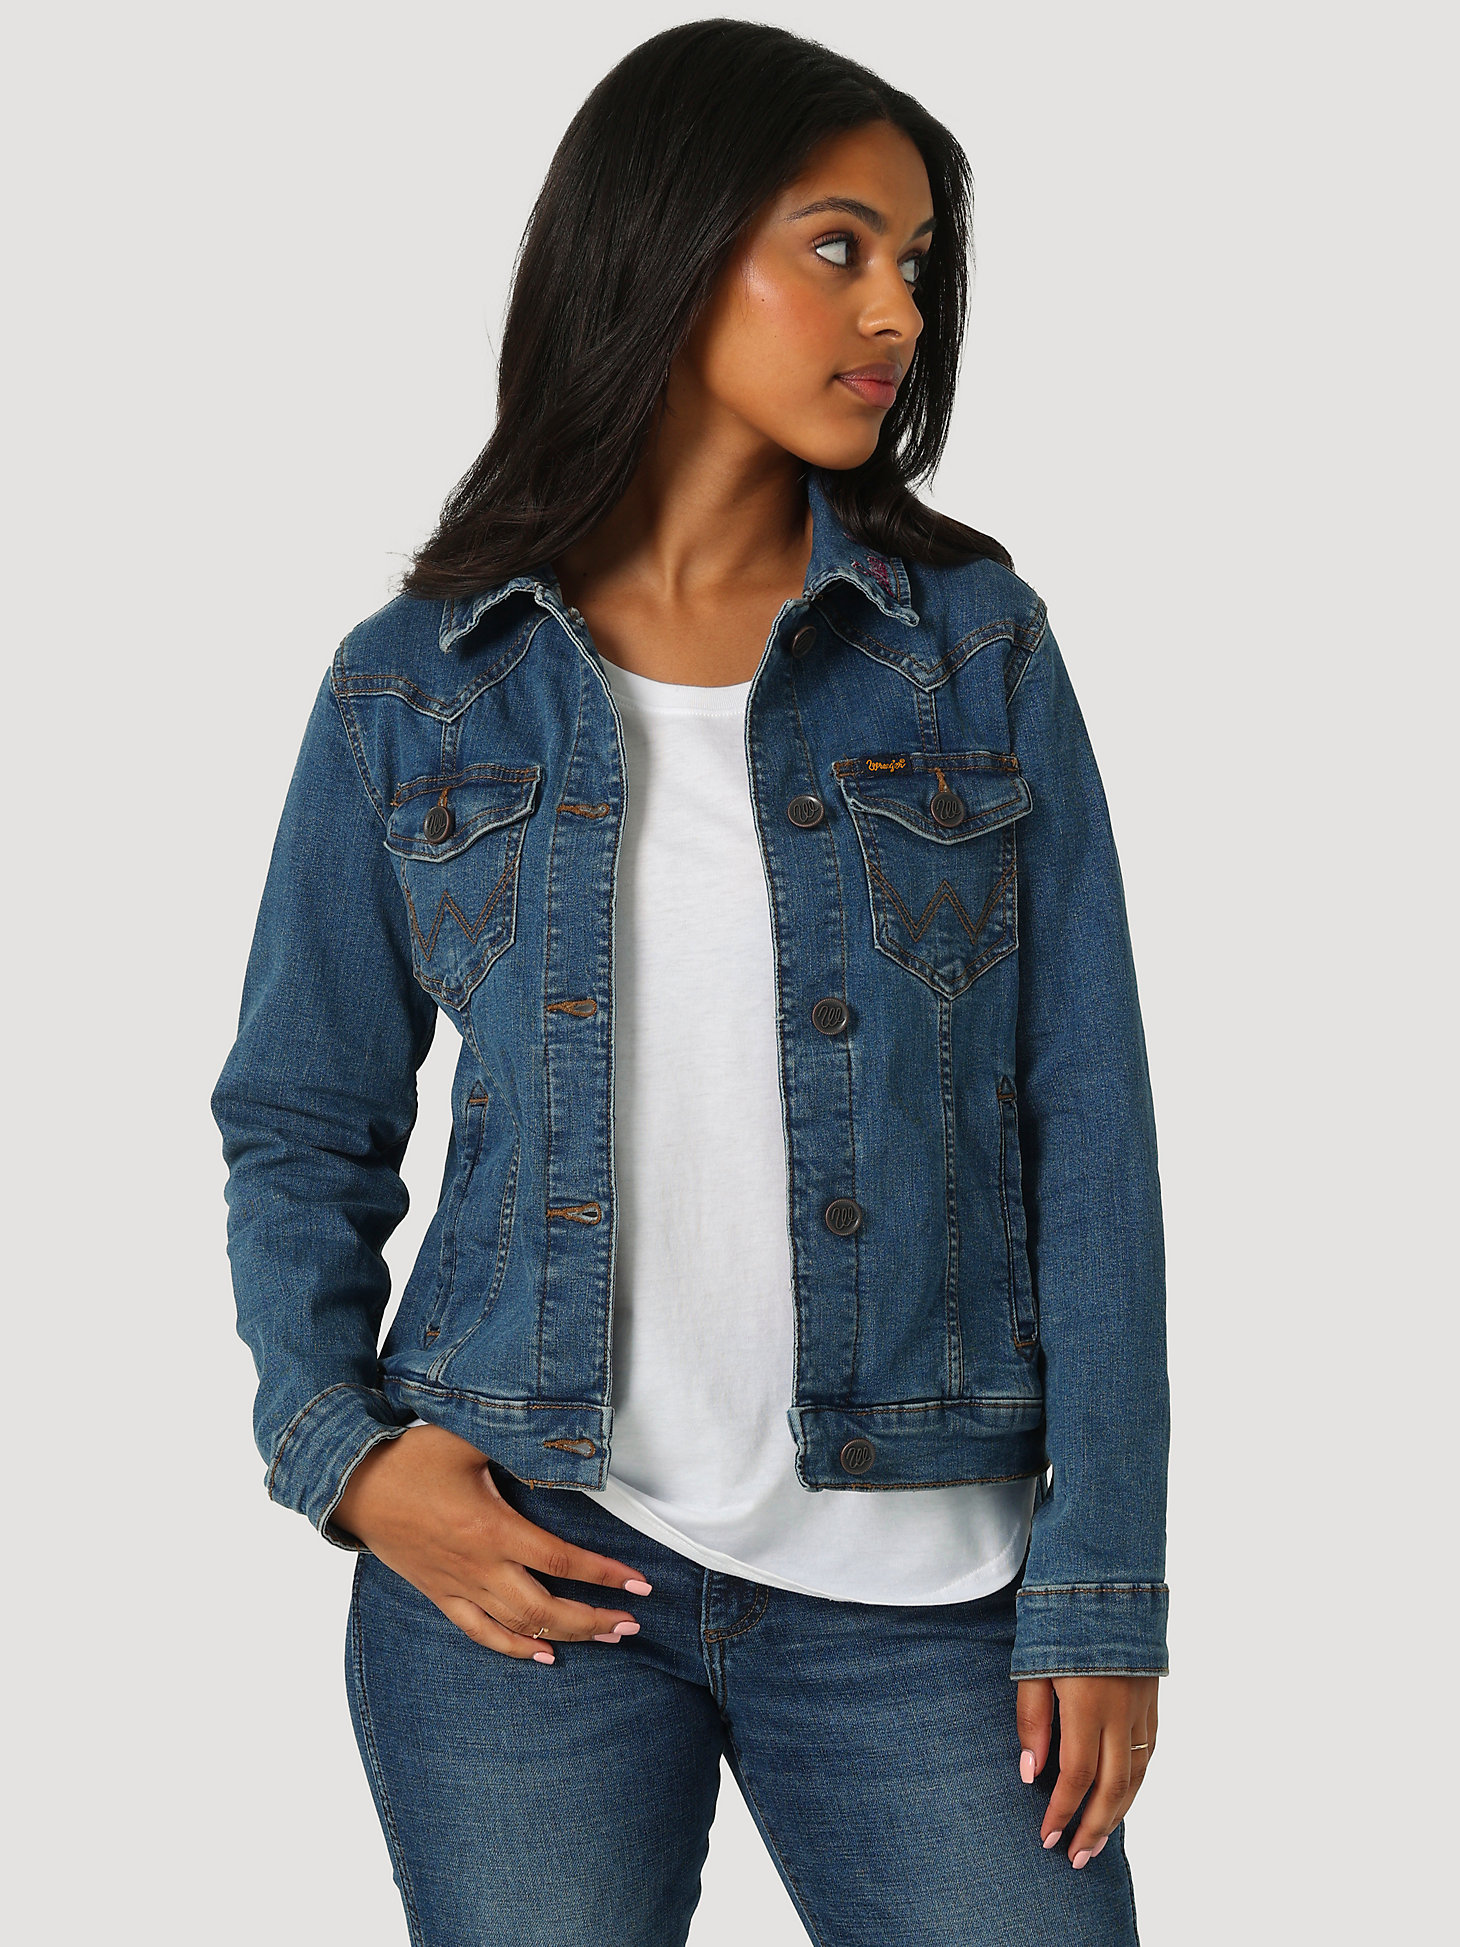 Women's Wrangler Collegiate Embroidered Classic Fit Denim Jacket in Texas A&M main view